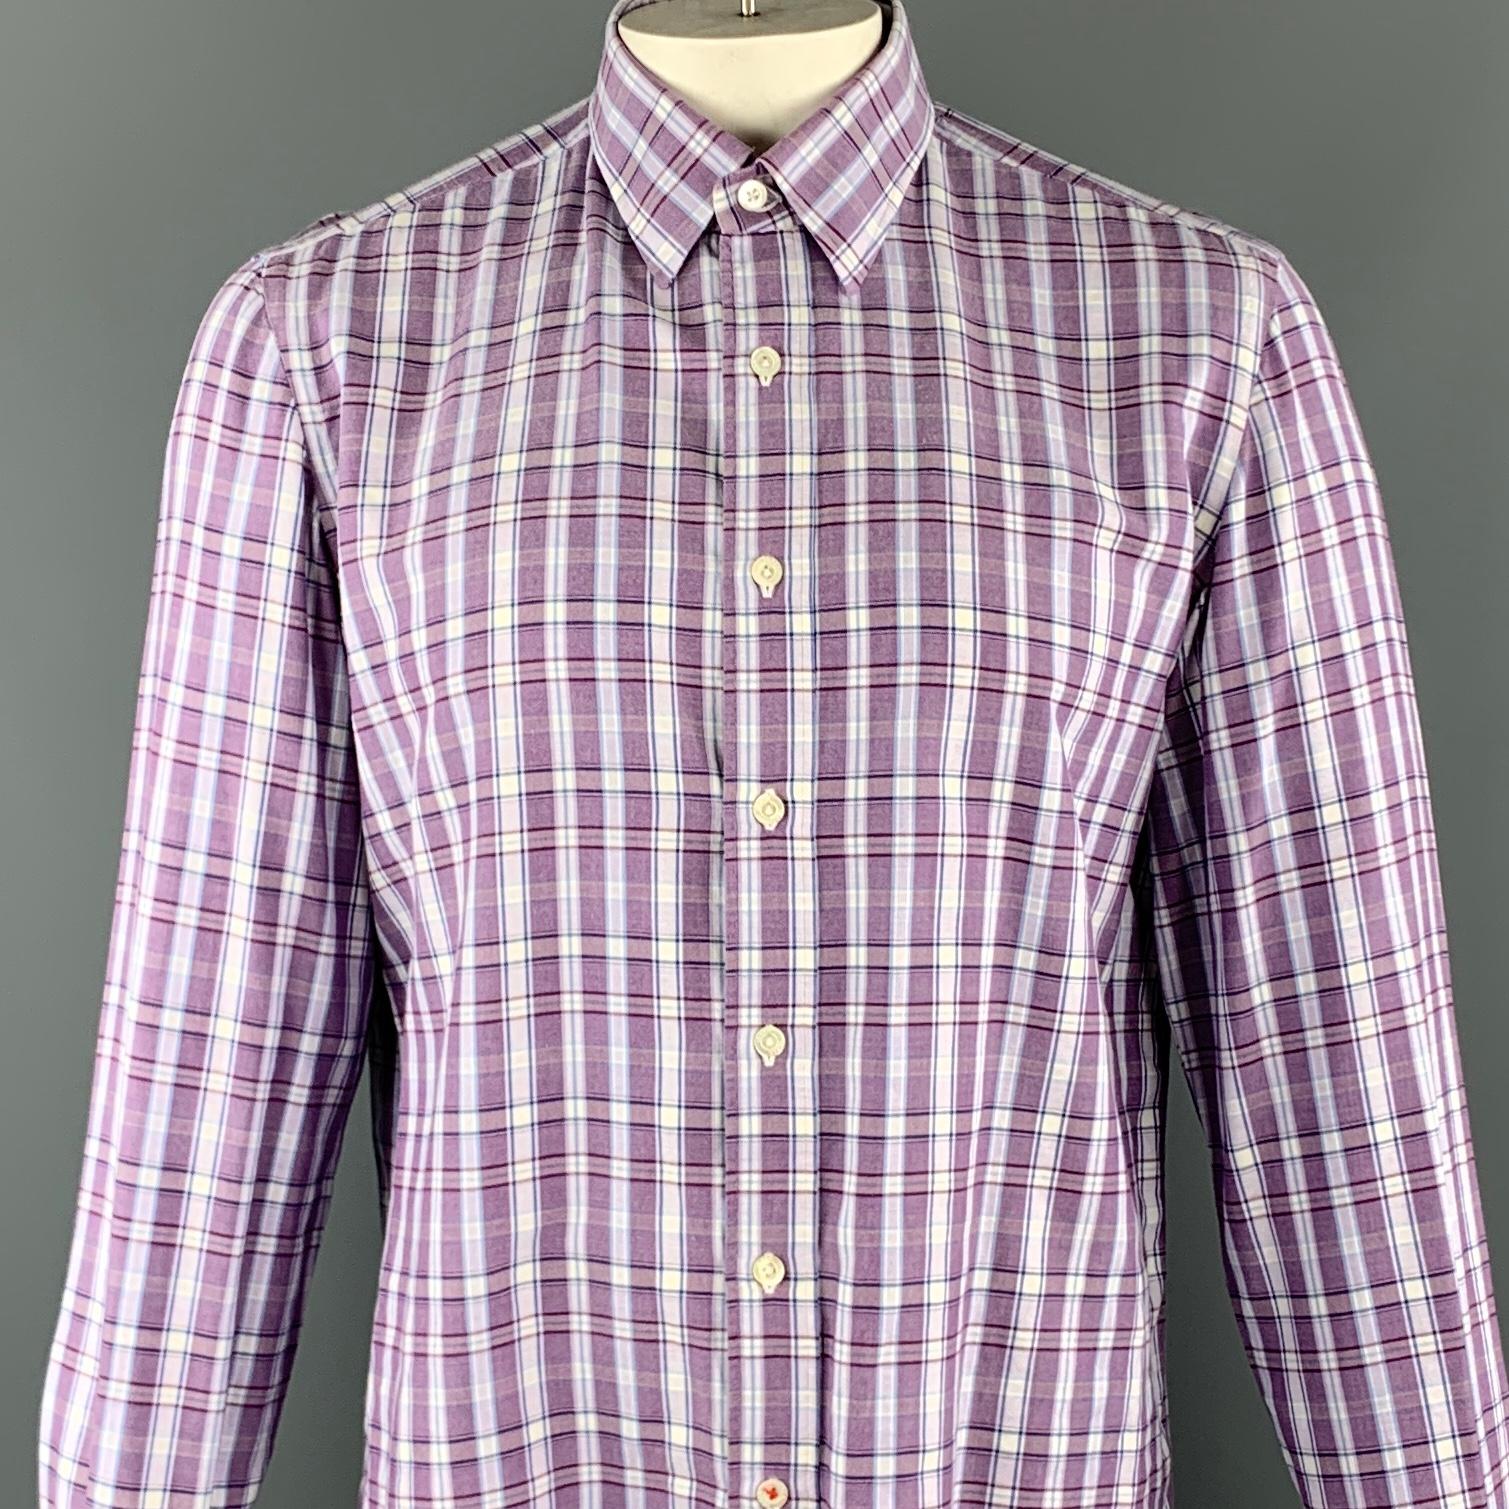 ISAIA long sleeve shirt comes in a purple plaid cotton featuring a button up style and a spread collar. Made in Italy.

Excellent Pre-Owned Condition.
Marked: 41 / 16

Measurements:

Shoulder: 18 in.
Chest: 48 in.
Sleeve: 26.5 in. 
Length: 32 in.